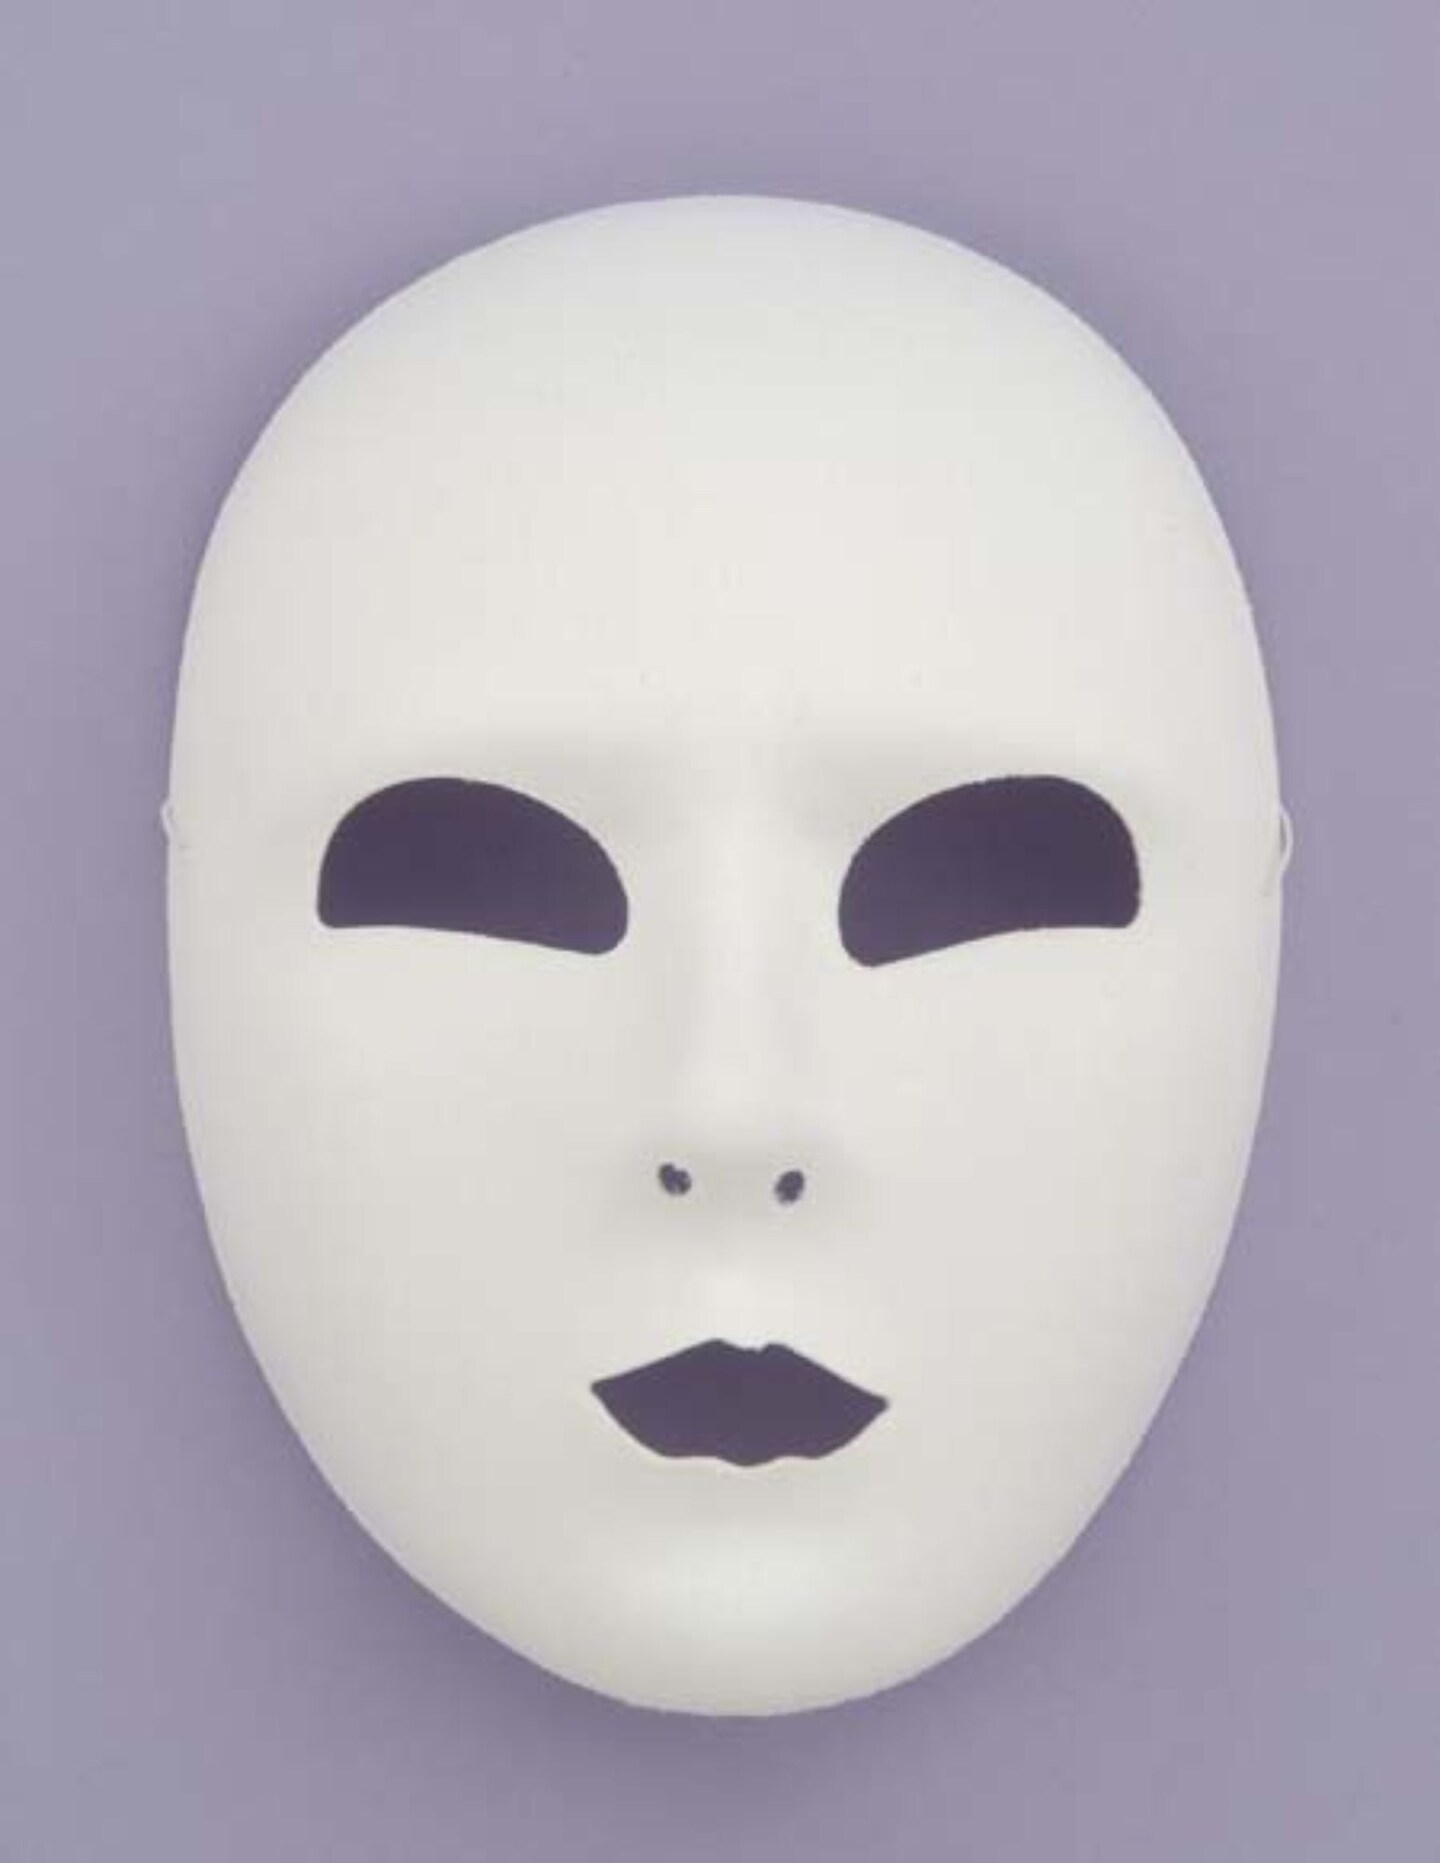 The Costume Center White Full Face Unisex Adult Halloween Mask Costume Accessory - One Size